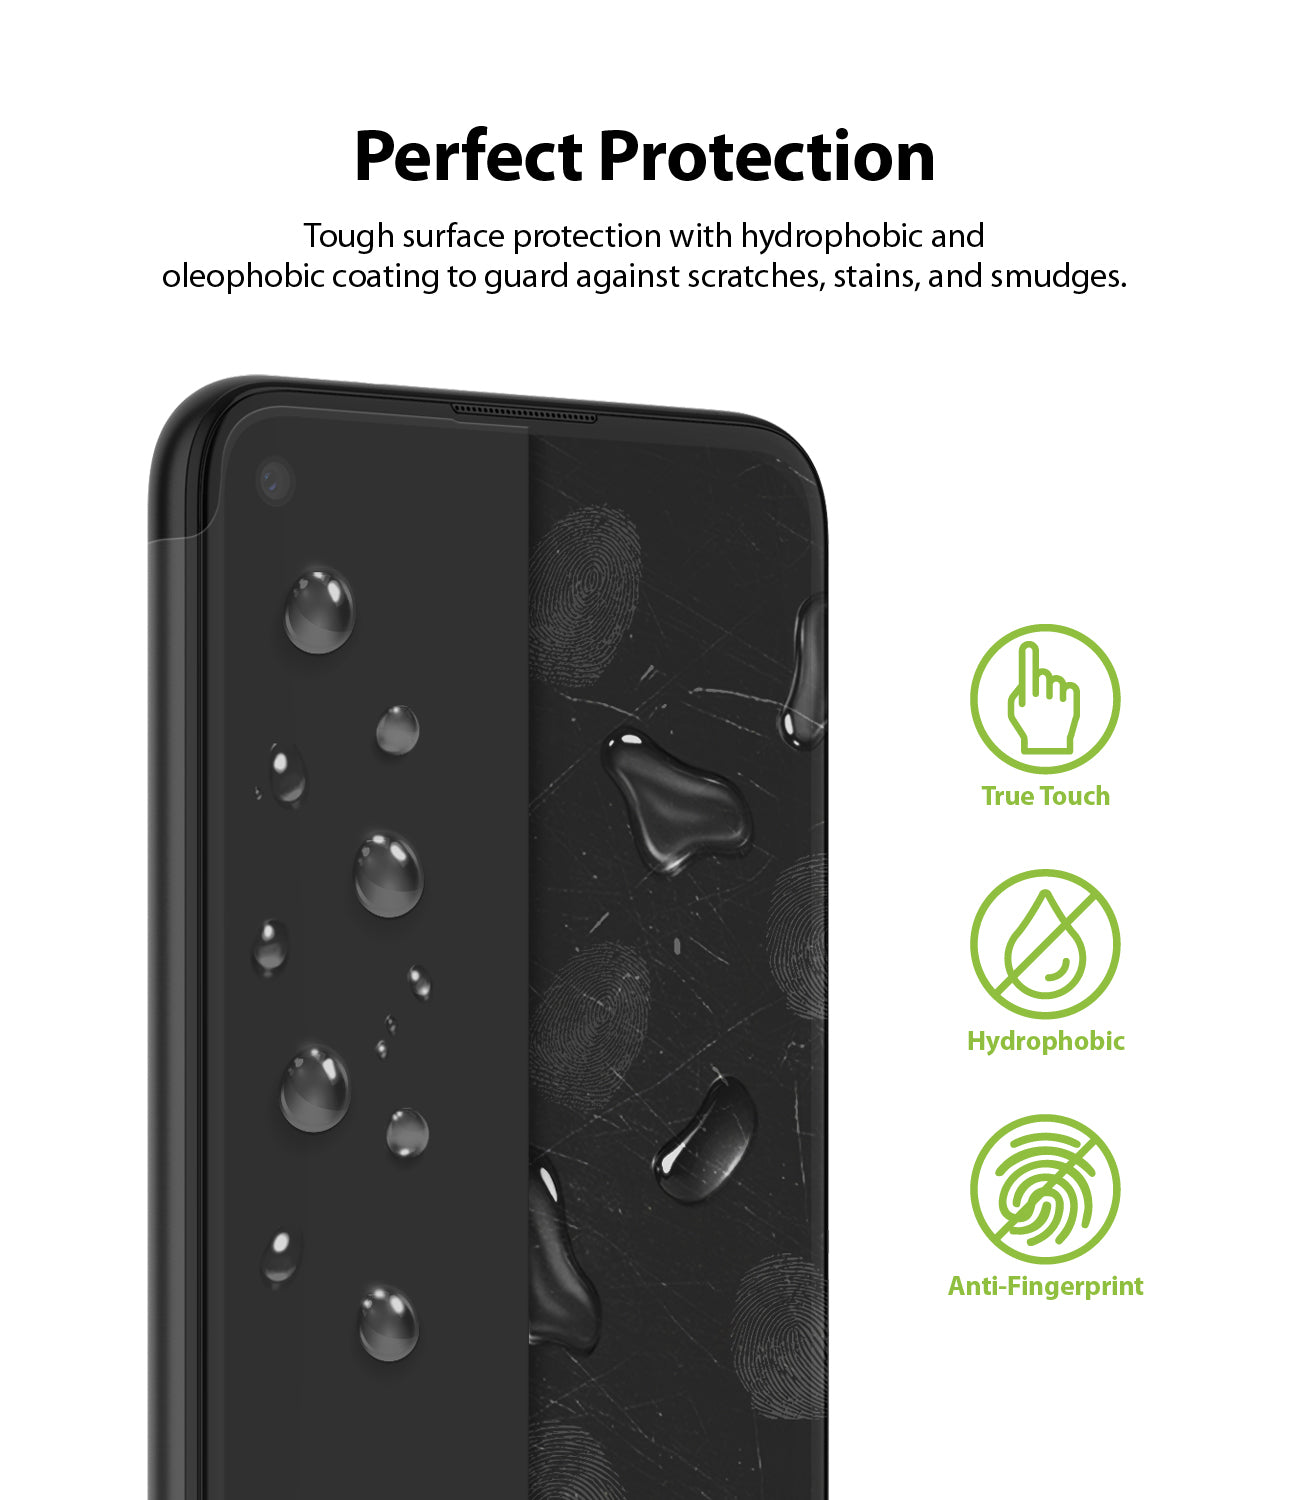 tough surface protection with hydrophobic and oleophobic coating to guard against scratches, stains, and smudges